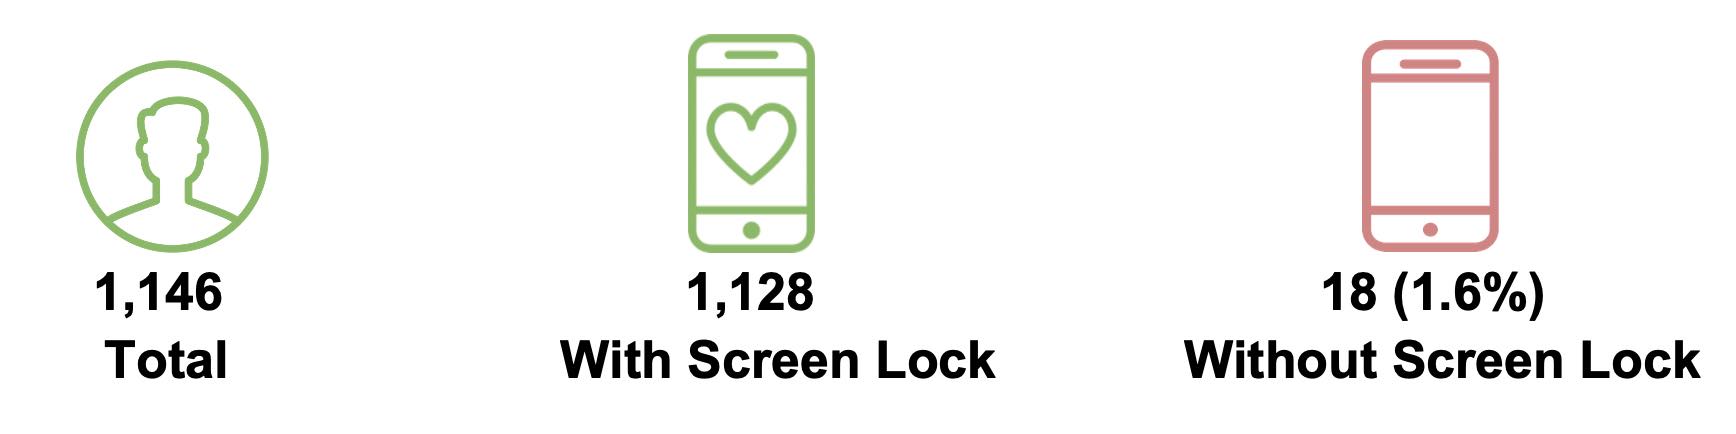 Graphic that illustrates that out of 1,146 total devices, 1,128 have screen locks while 18 (1.6%) don't.